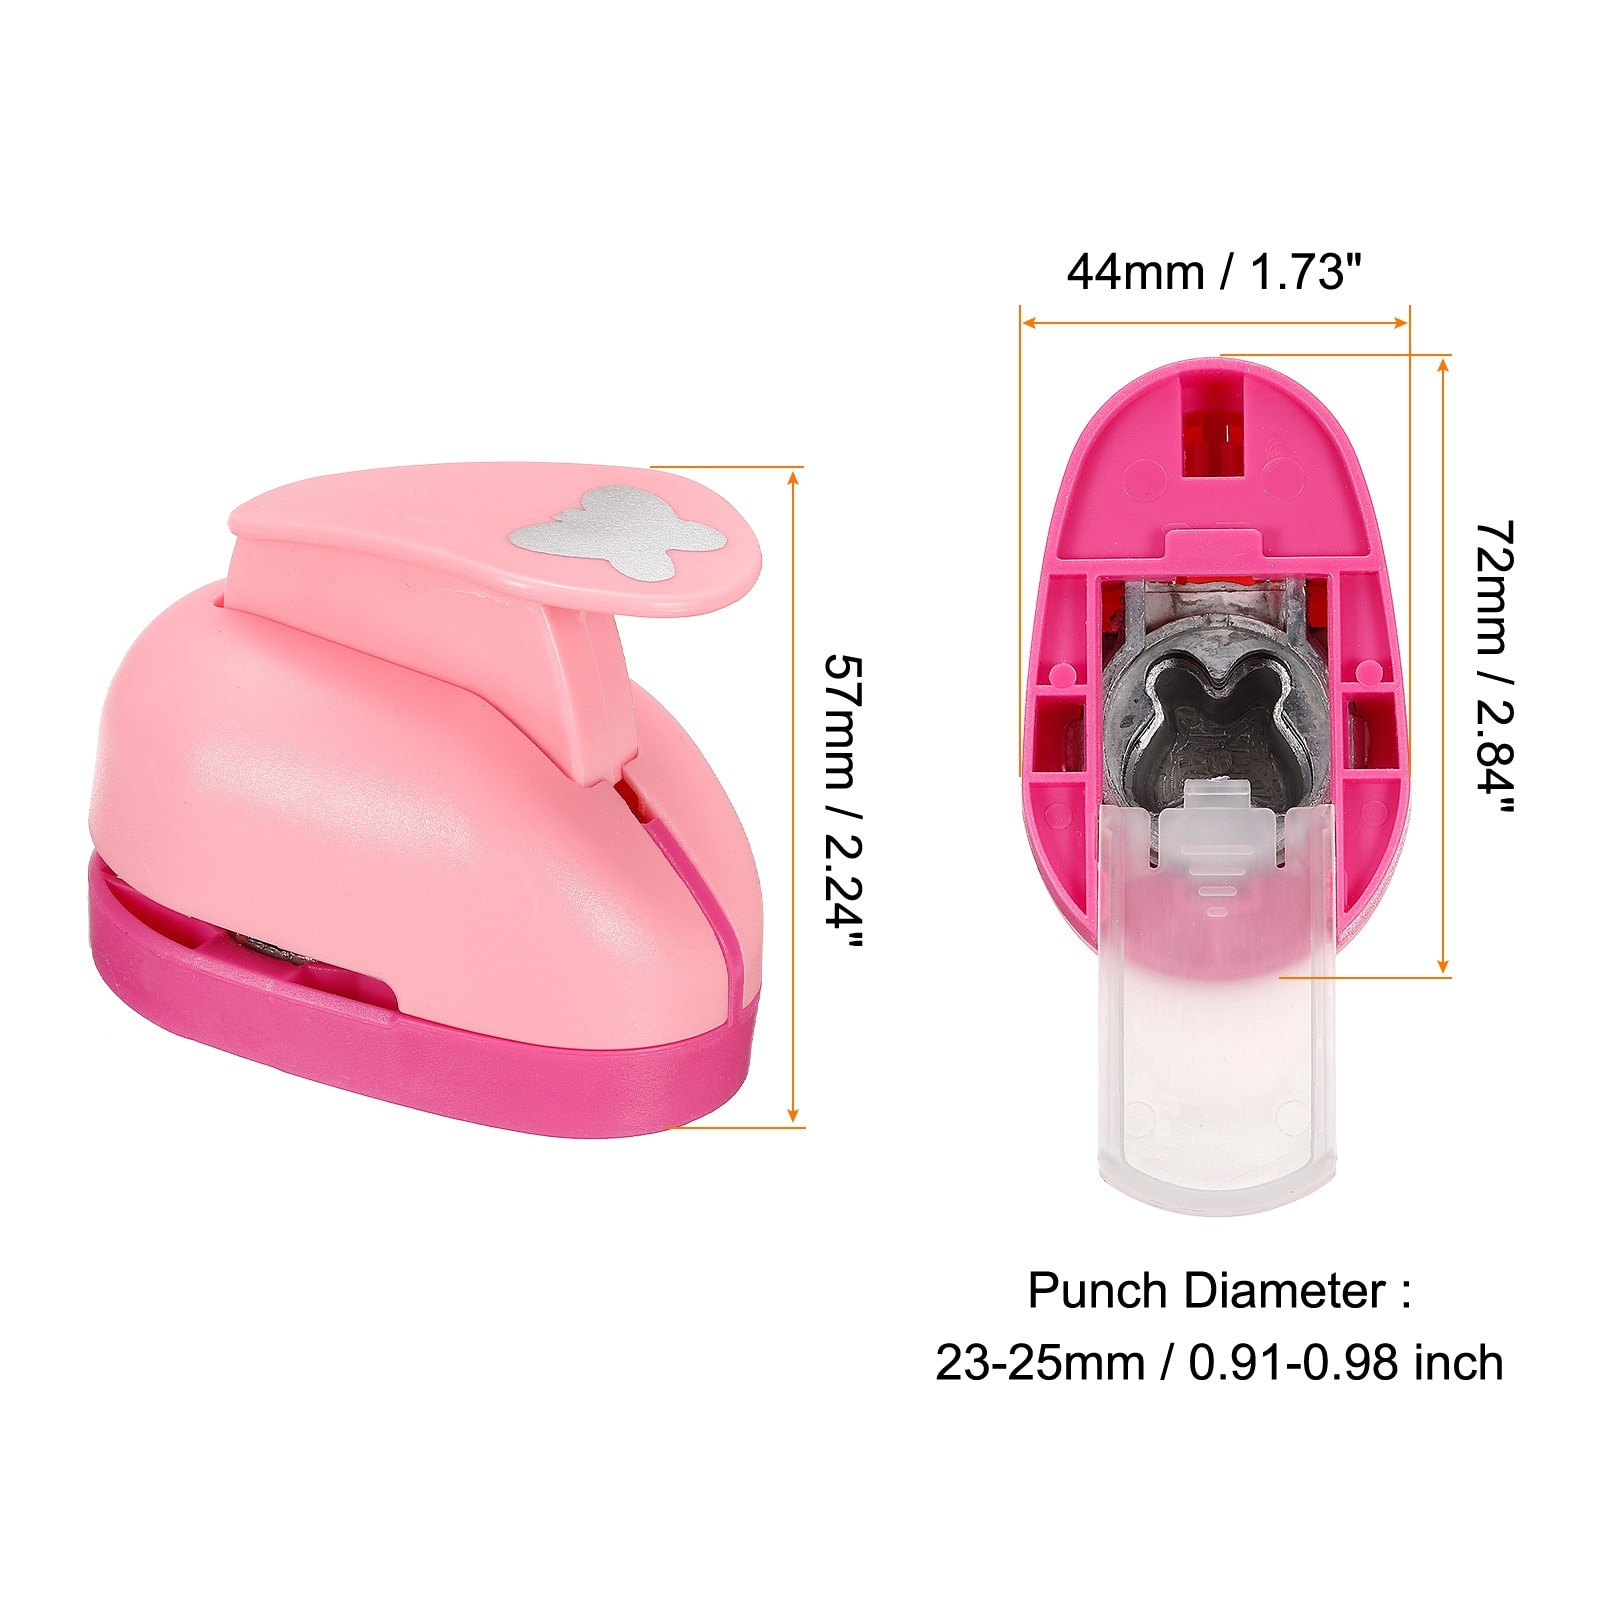 Paper Punch Shapes Mini Hole Puncher for DIY Craft Cards